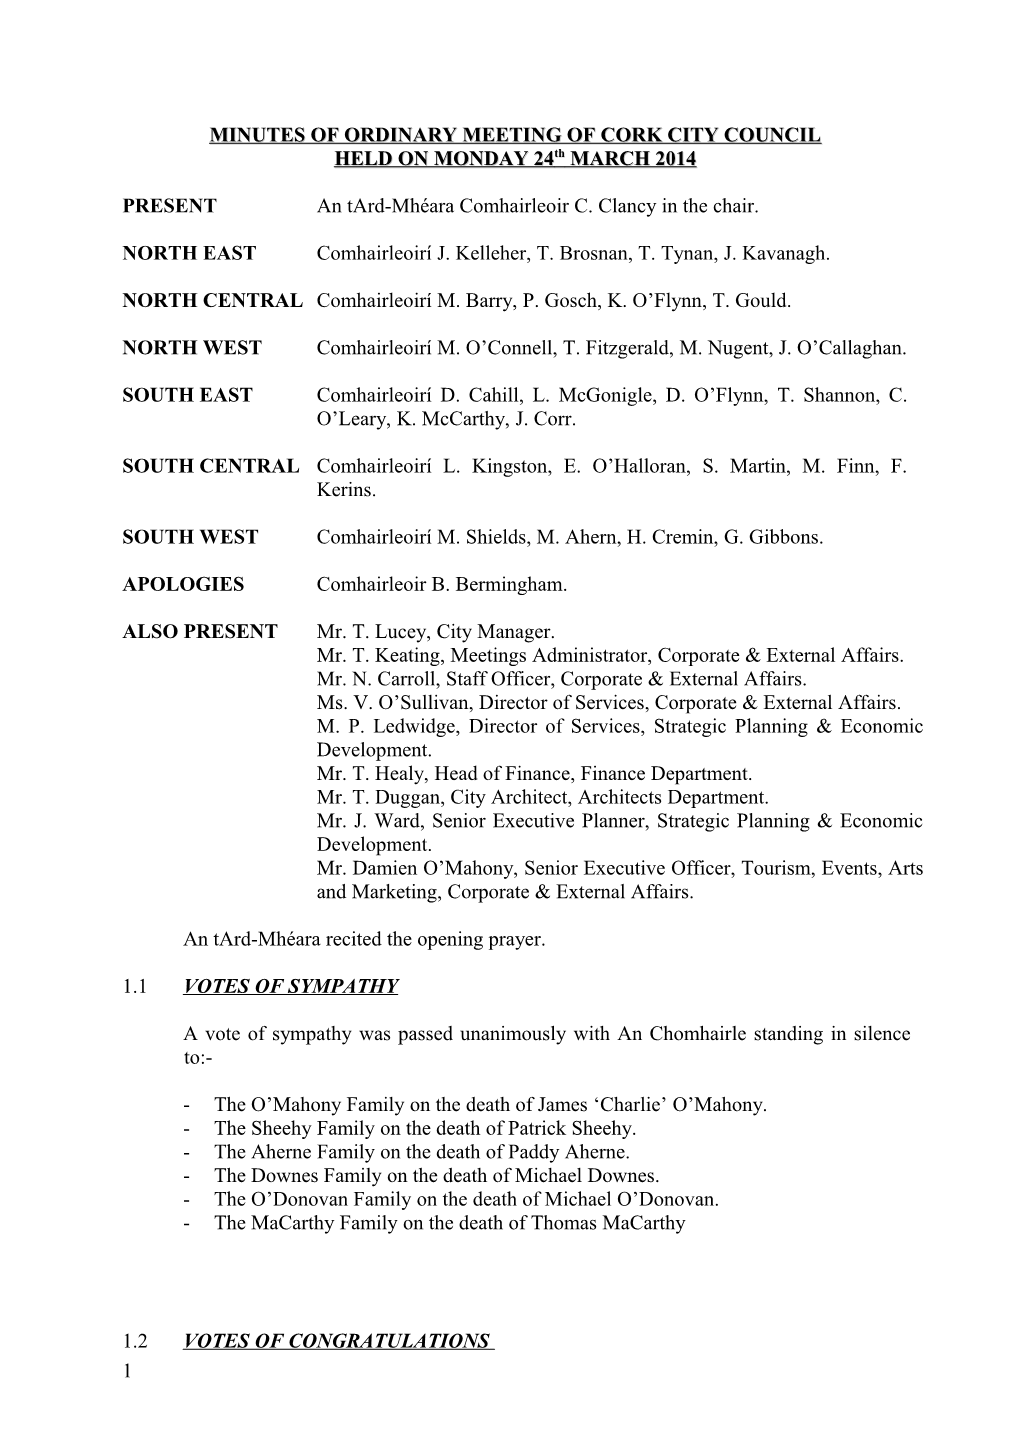 Minutes of Ordinary Meeting of Cork City Council